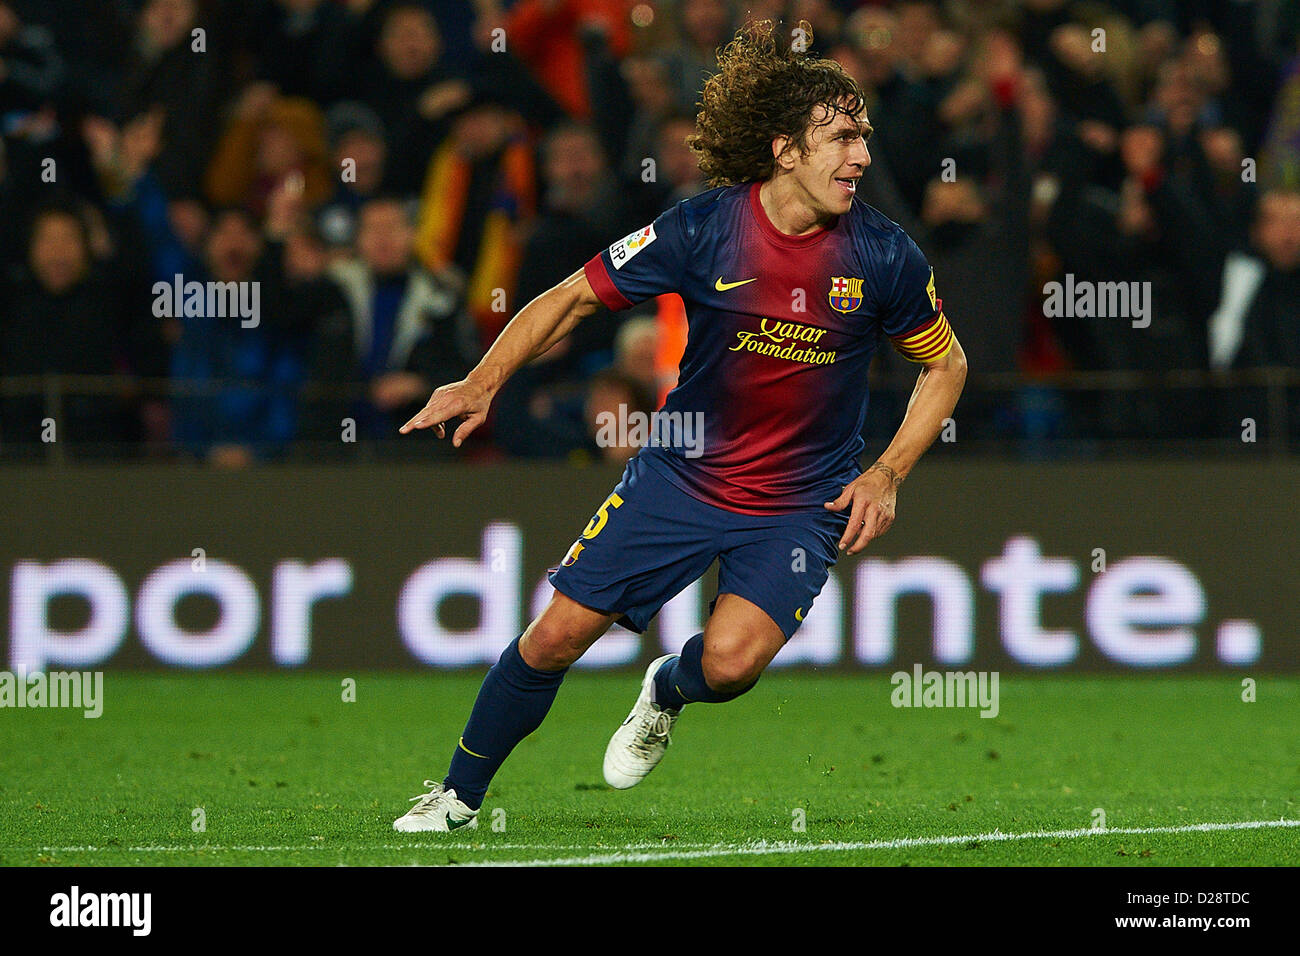 Barcelona, Spain. 16th January 2013. Carles Puyol (FC Barcelona) celebrates after scoring, during Kings Cup soccer match between FC Barcelona and Malaga CF, at the Camp Nou stadium in Barcelona, Spain, wednesday, January 16, 2013. Credit:  dpa picture alliance / Alamy Live News Stock Photo